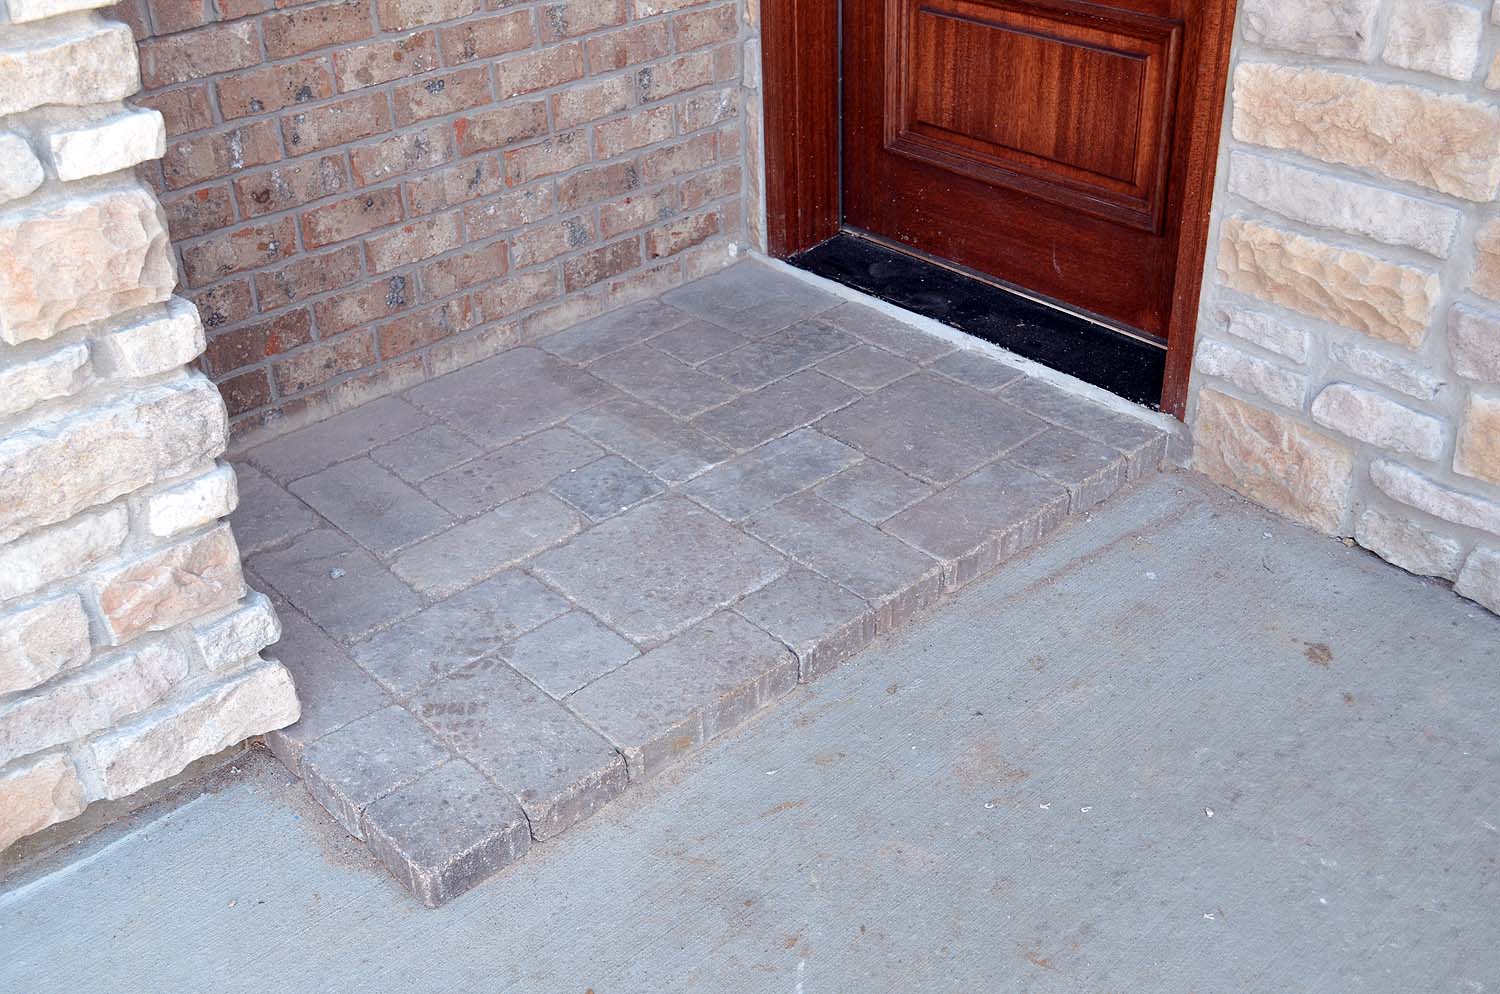 Pavers at side porch entry